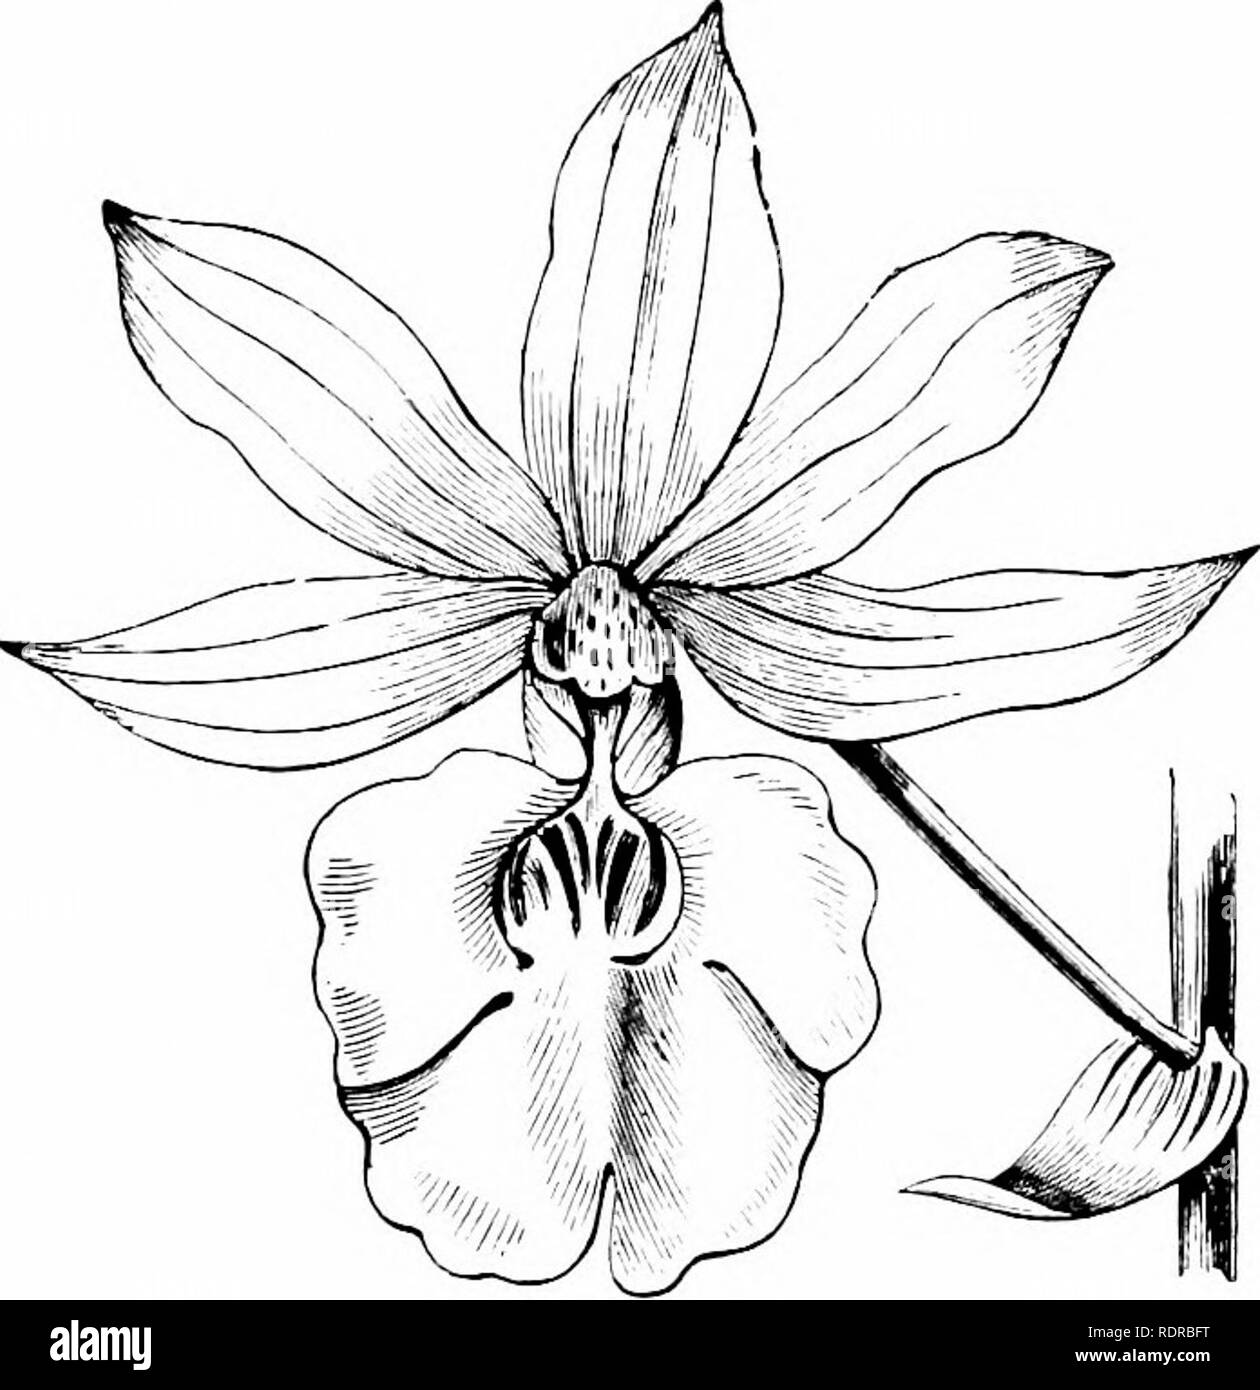 . Orchids: their culture and management. Orchids. AND THEIR MANAGEMENT. 8i Galanthe. porpliyna labrosior and vestita rubro-ocidata (Lawrence), revertfiis unrecorded (Lawrence), RolUnsoni vcratrifolia and Masuca. Sandhui-stia)ia rosea and vestita ruiro-oculata (Lawrence). sanguinaria vestita and Veitehii (Lawrence). Sedenii Teite/iii and -vestita ruiro-oeiilata (Veitch). Sibvl. 7'estita nibro-oenlata and rosea (Cookson)^ splendens rosea and Bryan (Cookson).. Fig. 25. Flower of Cal.^nihe Veitchii (nat. size). Veitehii (Fig. 25) ... .rosea and vestita (Veitch). versicolor unrecorded (Lawrence). V Stock Photo